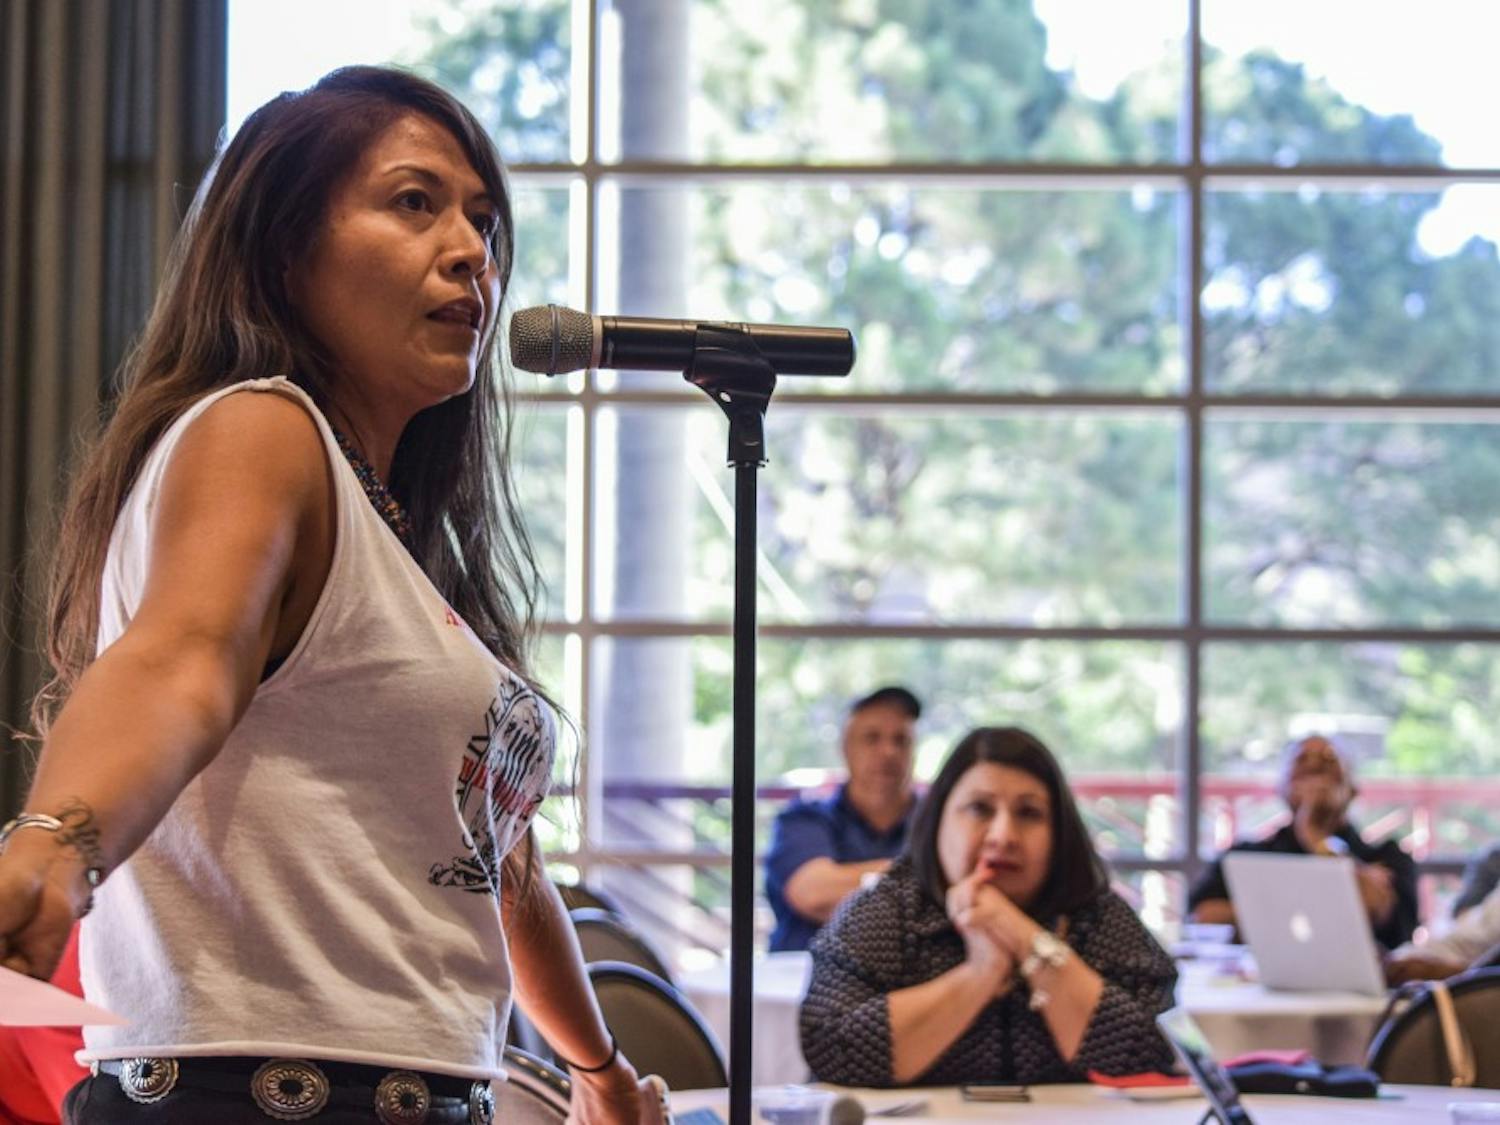 Cheyenne Antonio speaks at the UNM Seal Forum on Thursday evening in the SUB Ballroom. The forum was designed to start a conversation about the racial biases found on UNM’s official seal.